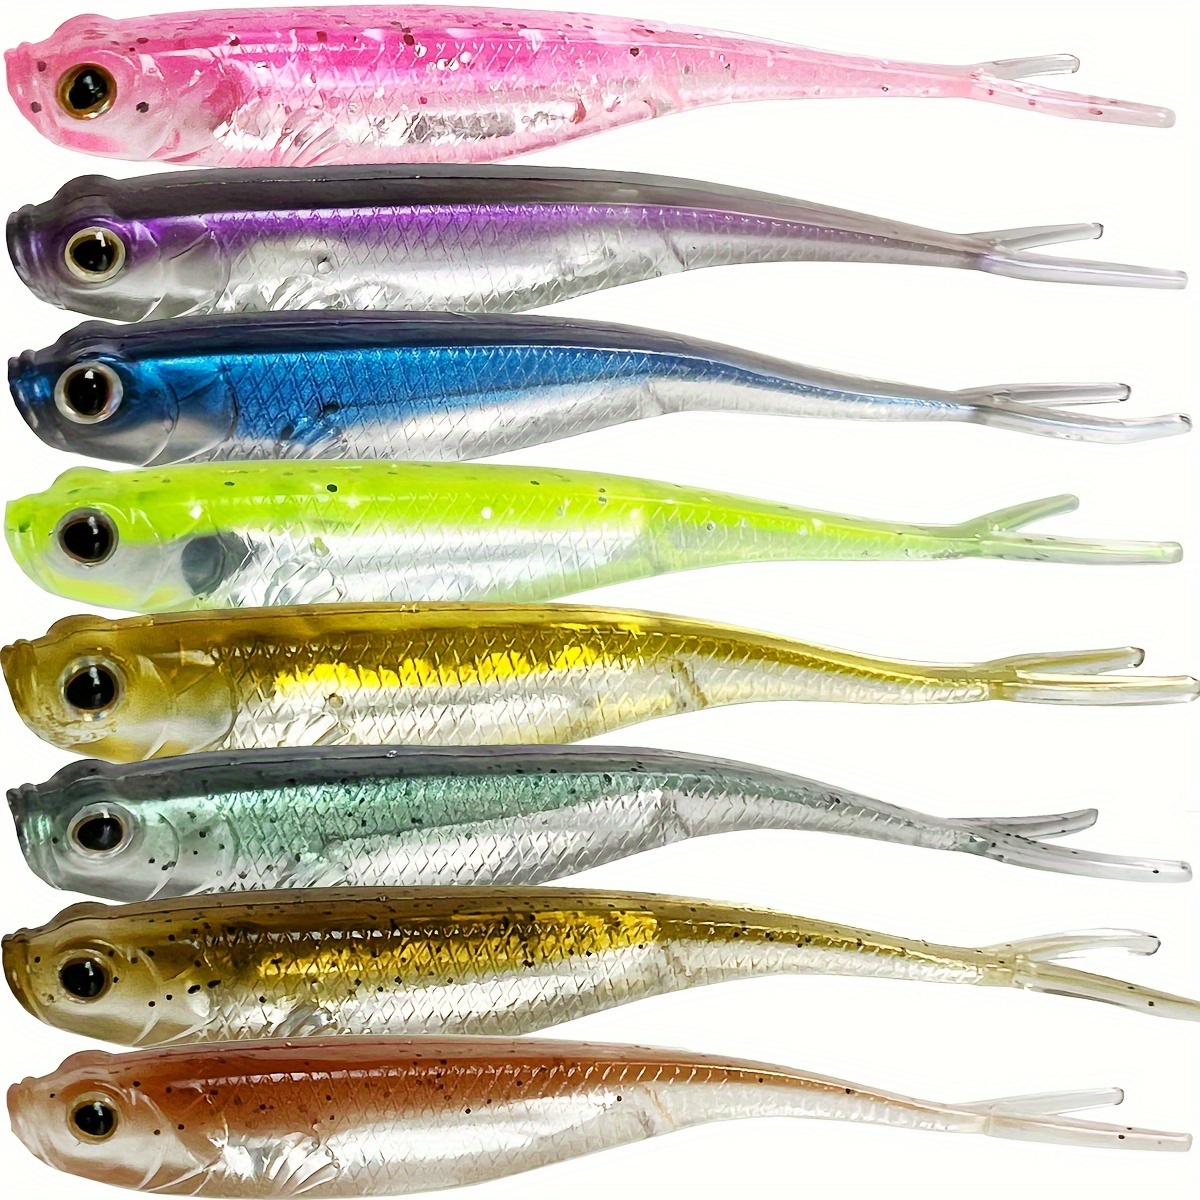 TRUSCEND Hand-Painted Soft Fishing Lures, Paddle Tail Swimbaits, Fishing  Lures for Bass Trout Crappie Walleye, Durable Plastic Bait for Bass  Fishing